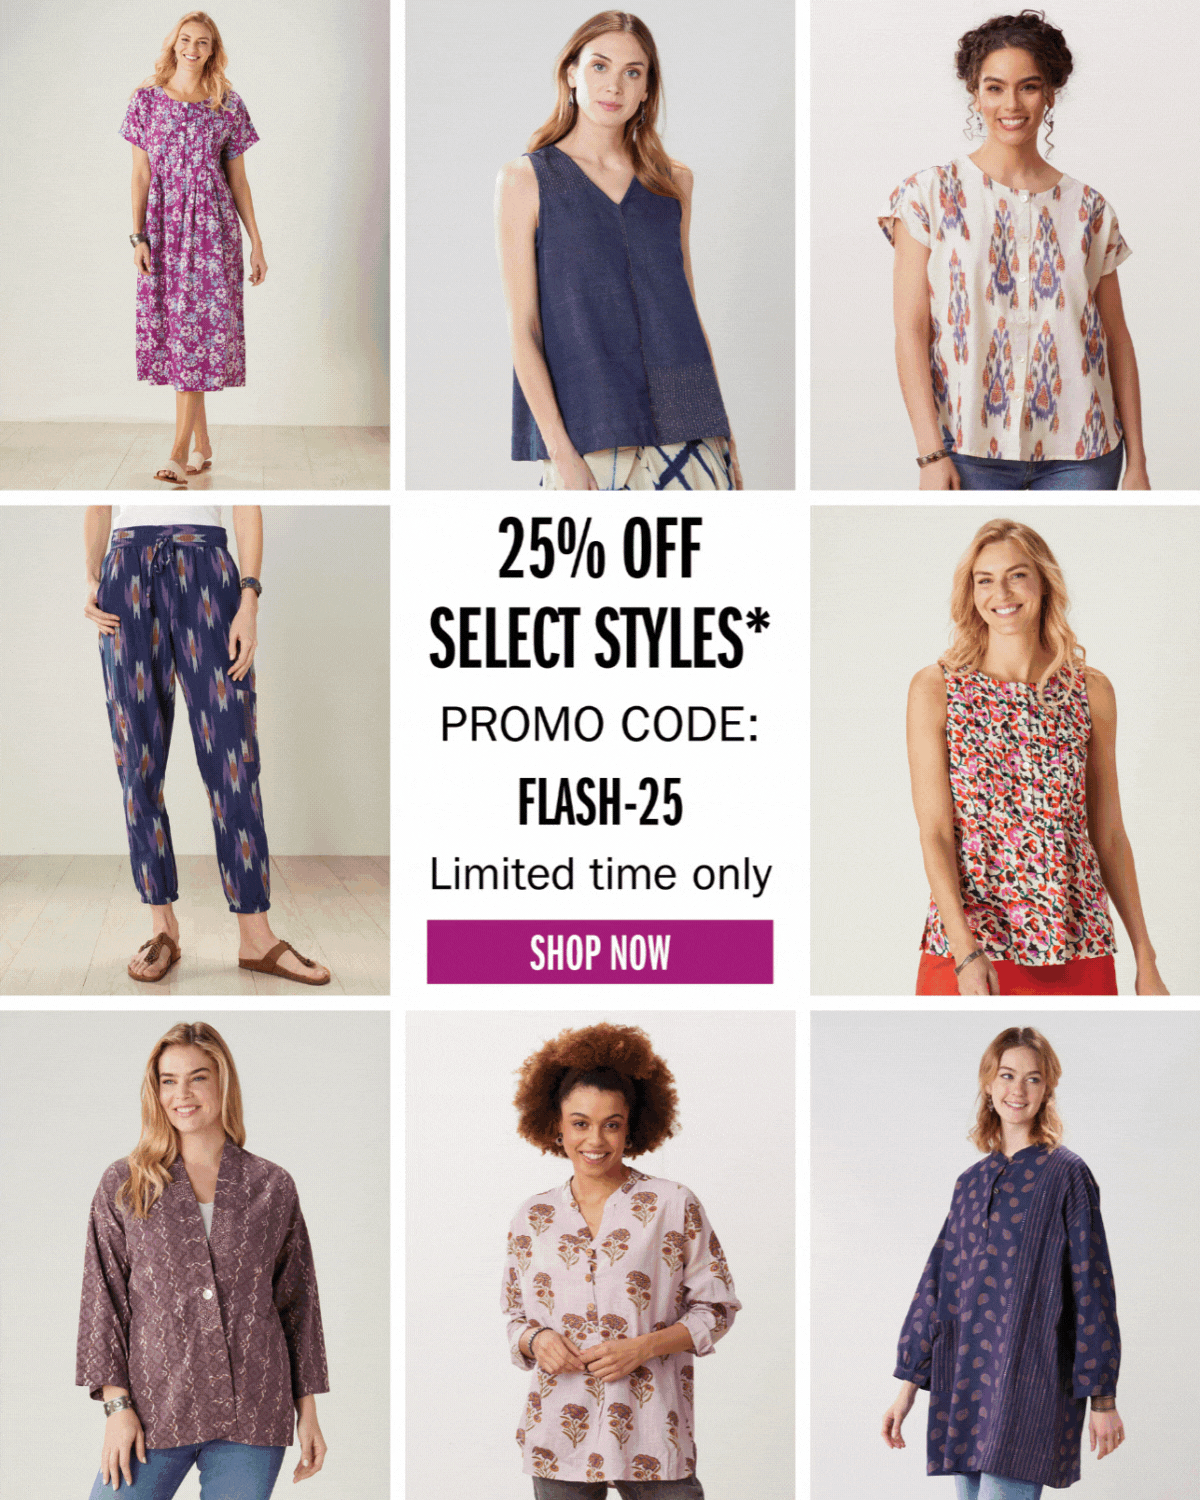 25% OFF SELECT STYLES* PROMO CODE: FLASH-25 Limited time only SHOP NOW